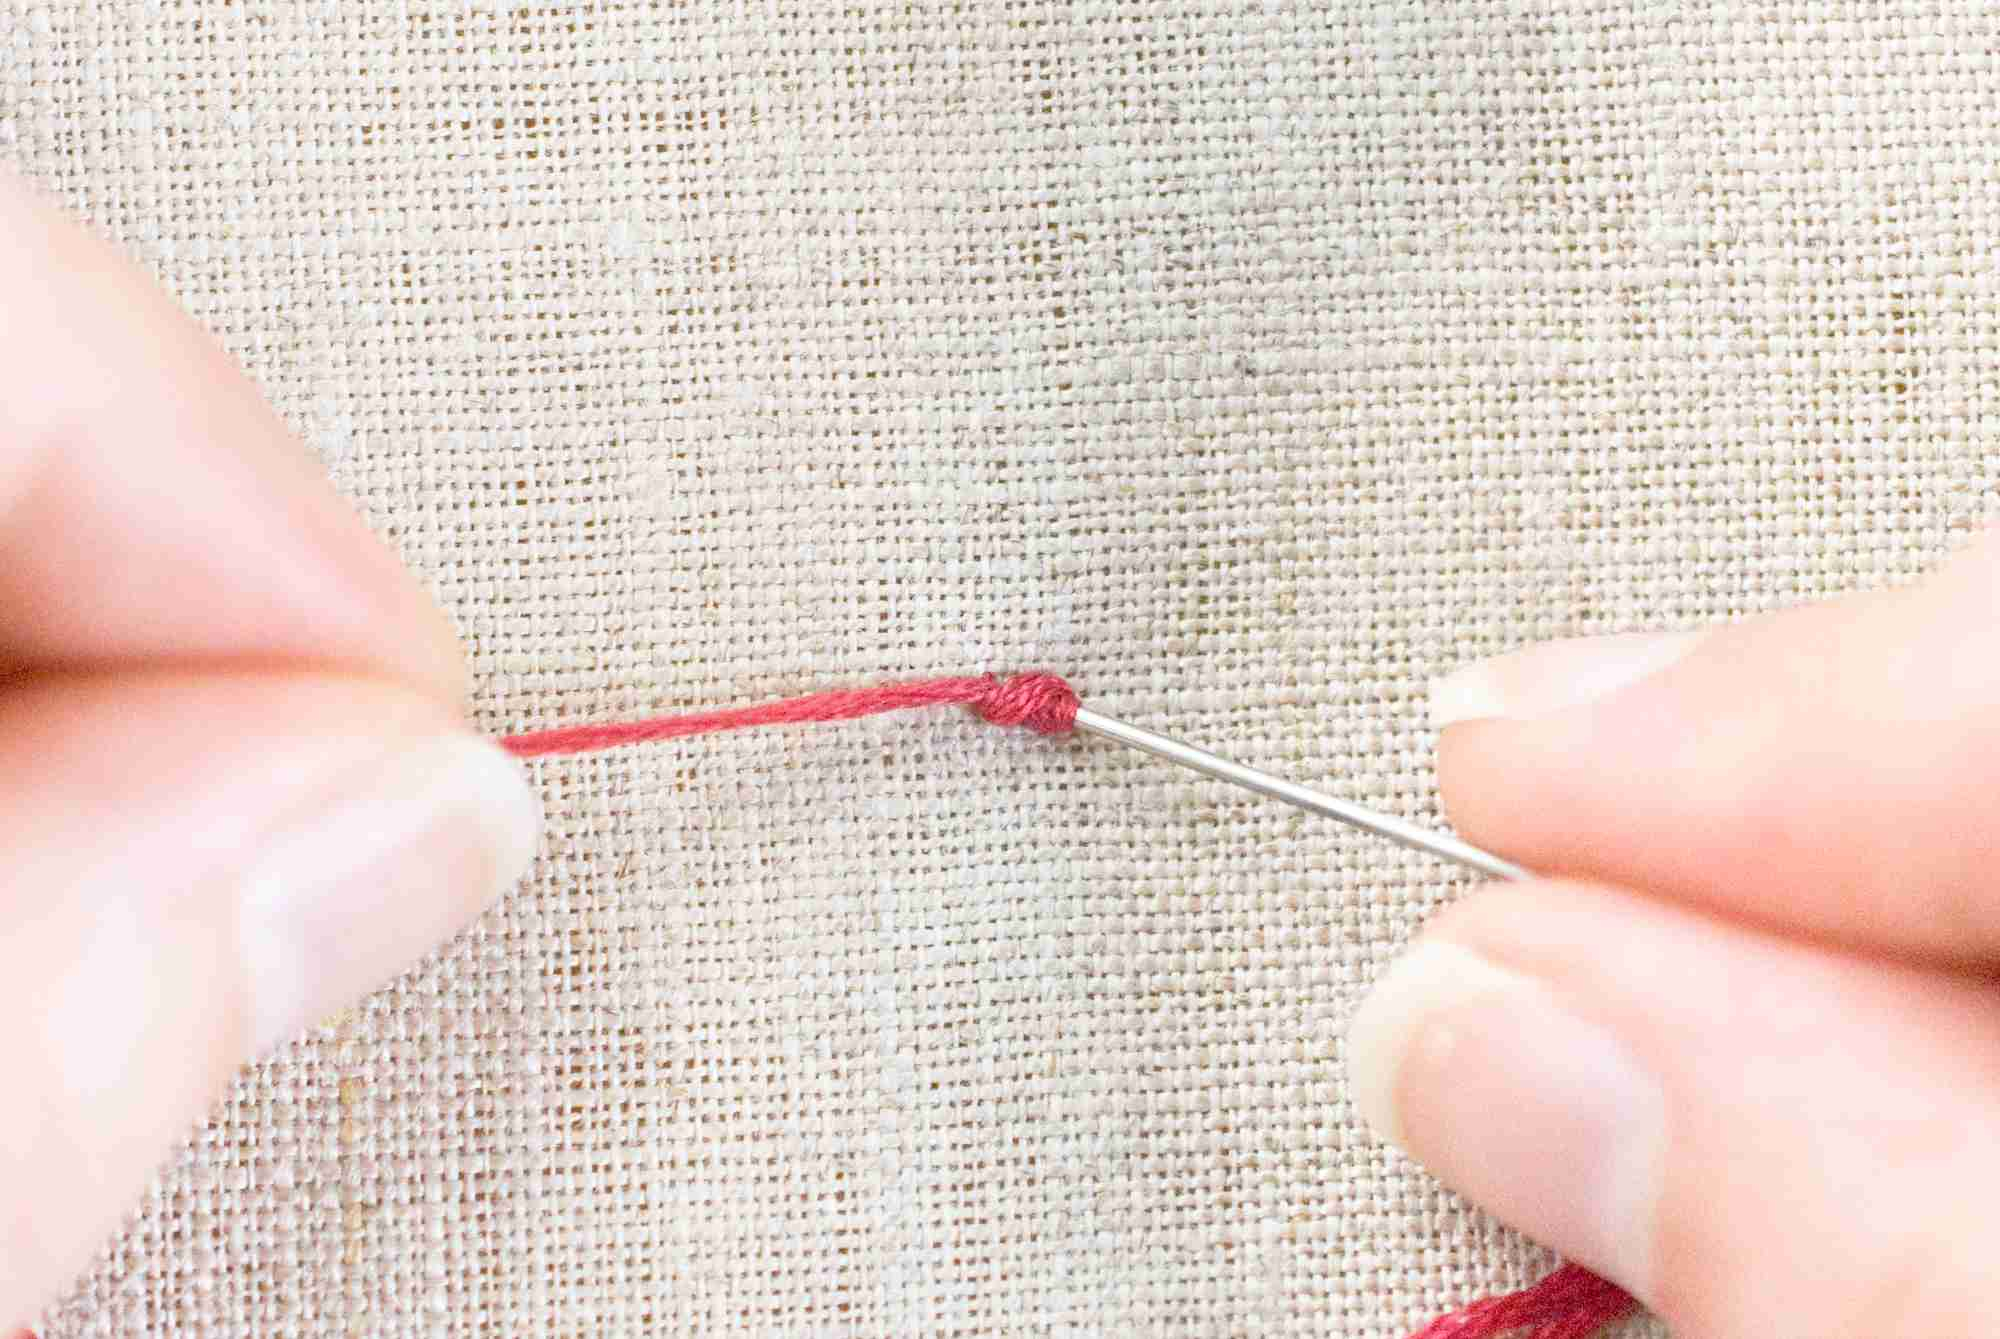 French Knot Embroidery Patterns How To Make A French Knot Easily